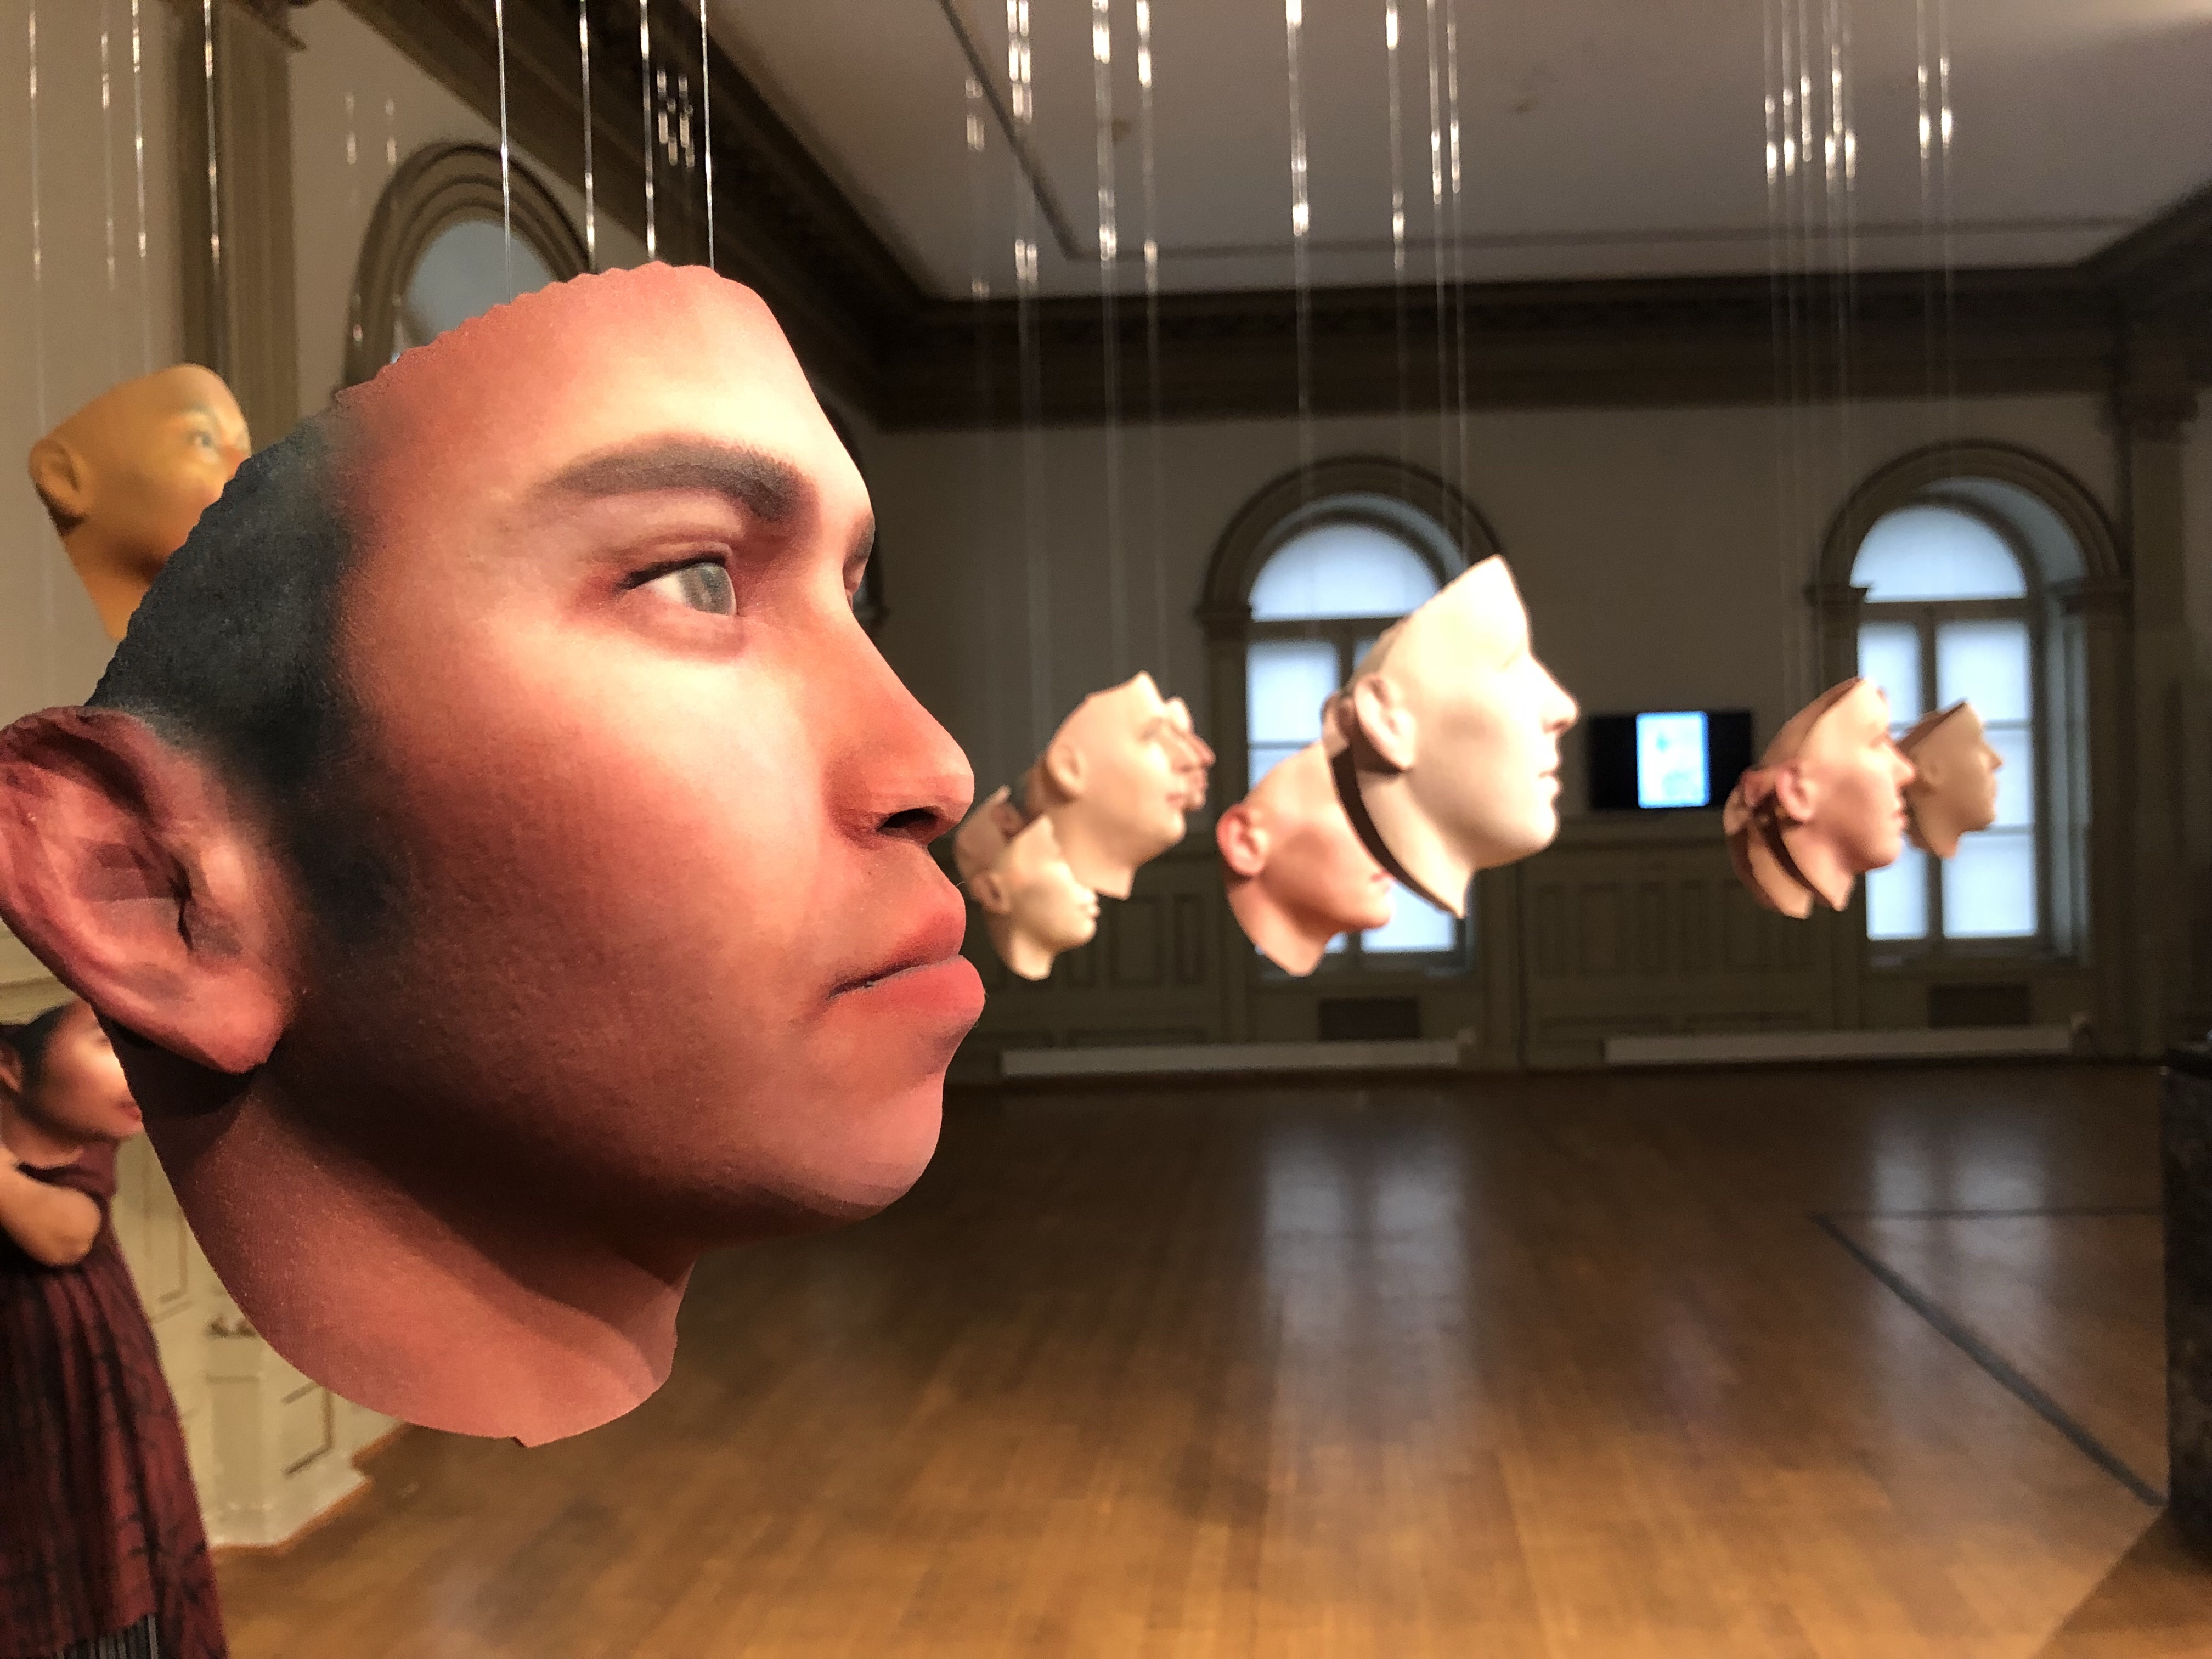 A mask of a photorealistic human face is hanging in the foreground. Other masks hang behind it. 